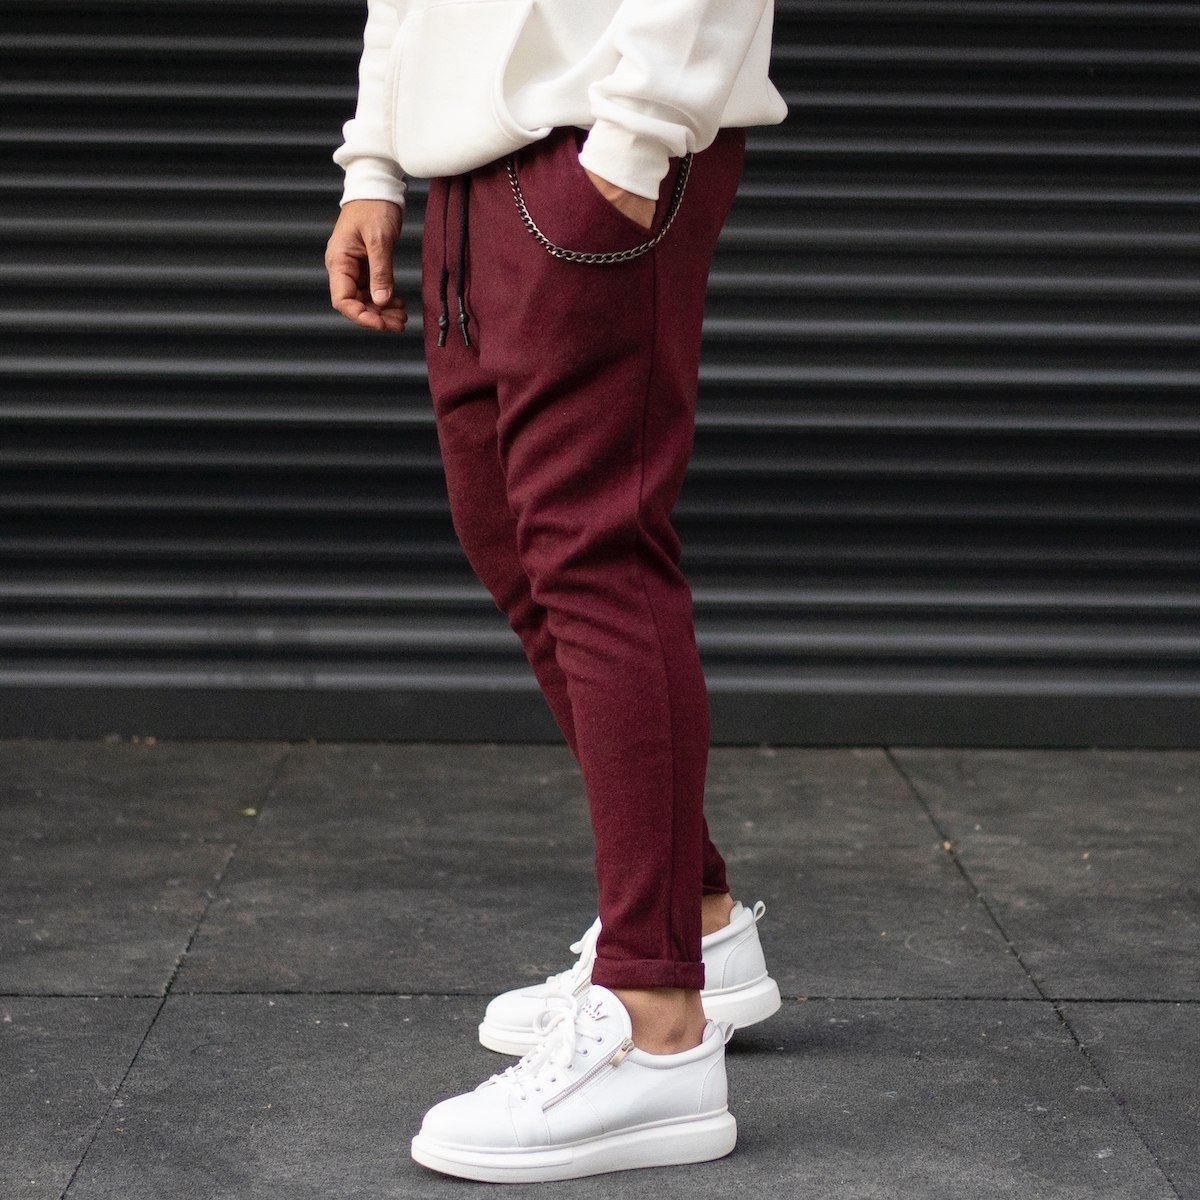 Men's Cachet Textured Sweatpants With Chain Detail In Claret Red